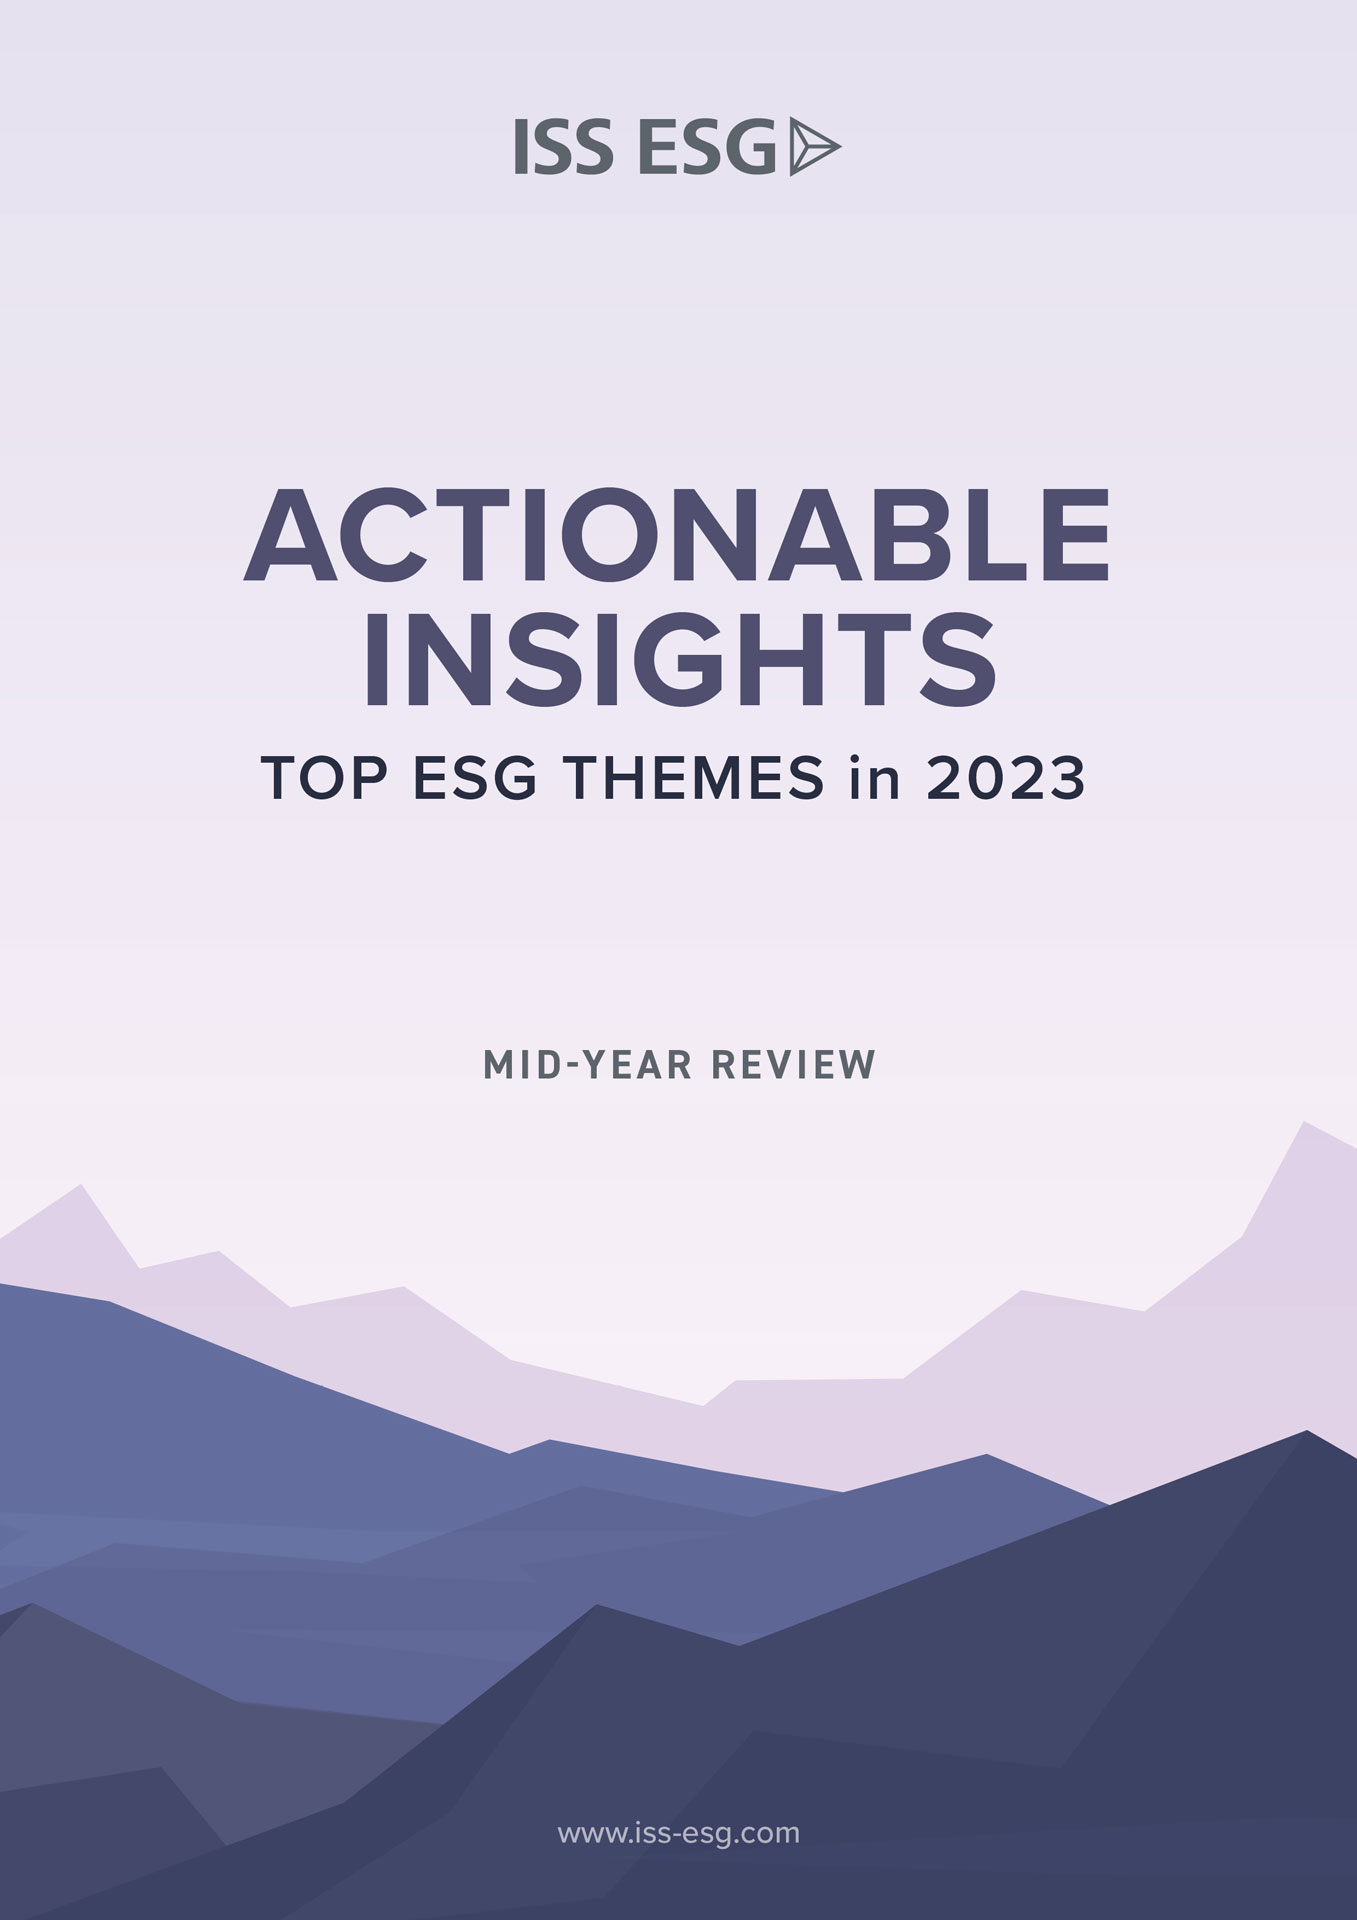 ISS ESG Actionable Insights Top ESG Themes in 2023 Midyear Review cover